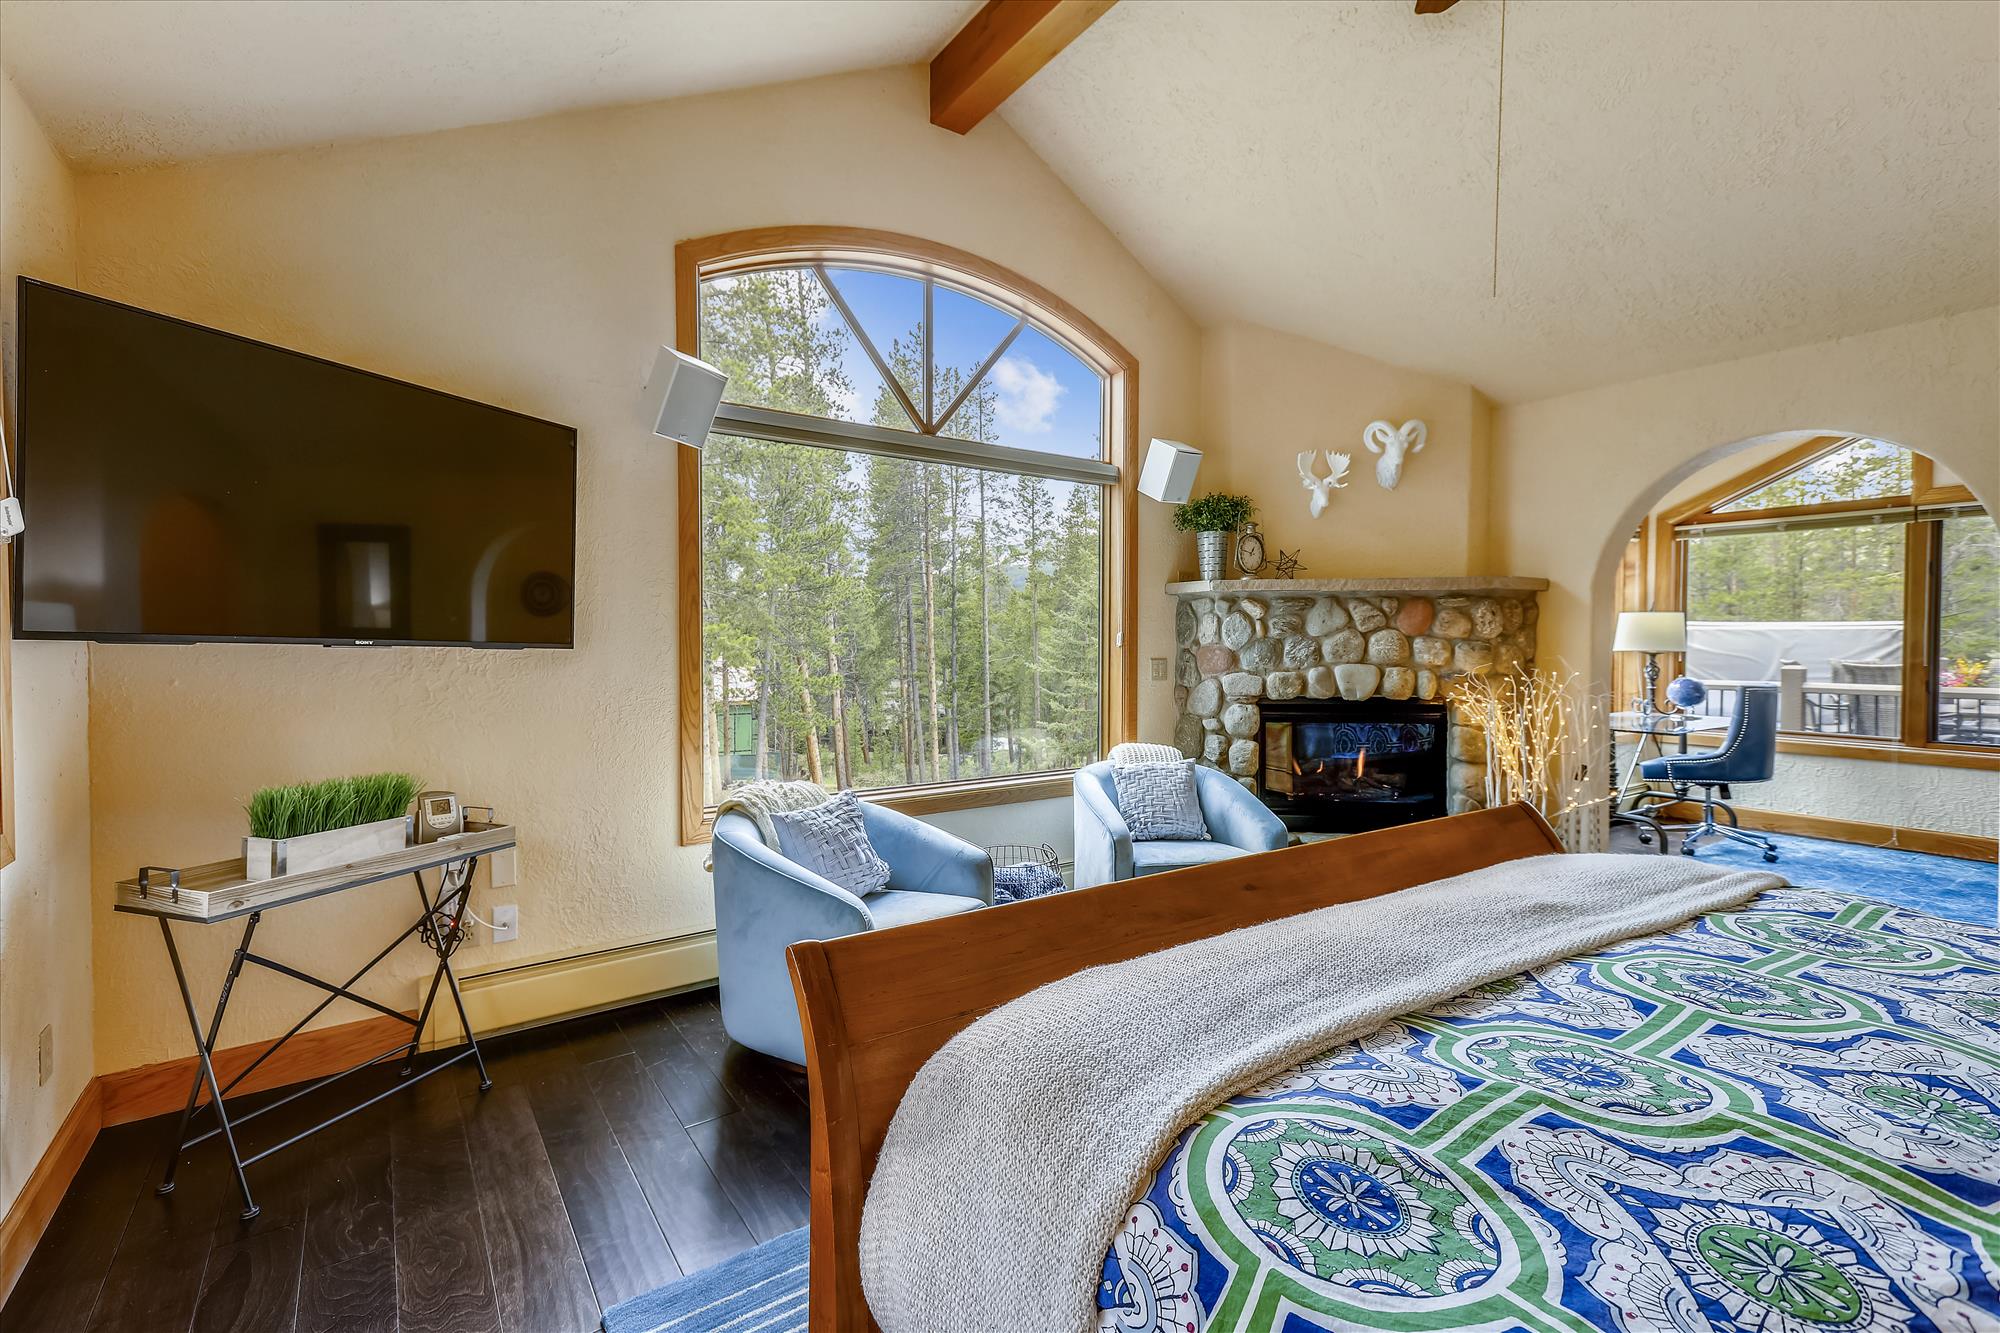 Enjoy a relaxing evening in this spacious master bedroom - Evergreen Lodge Breckenridge Vacation Rental